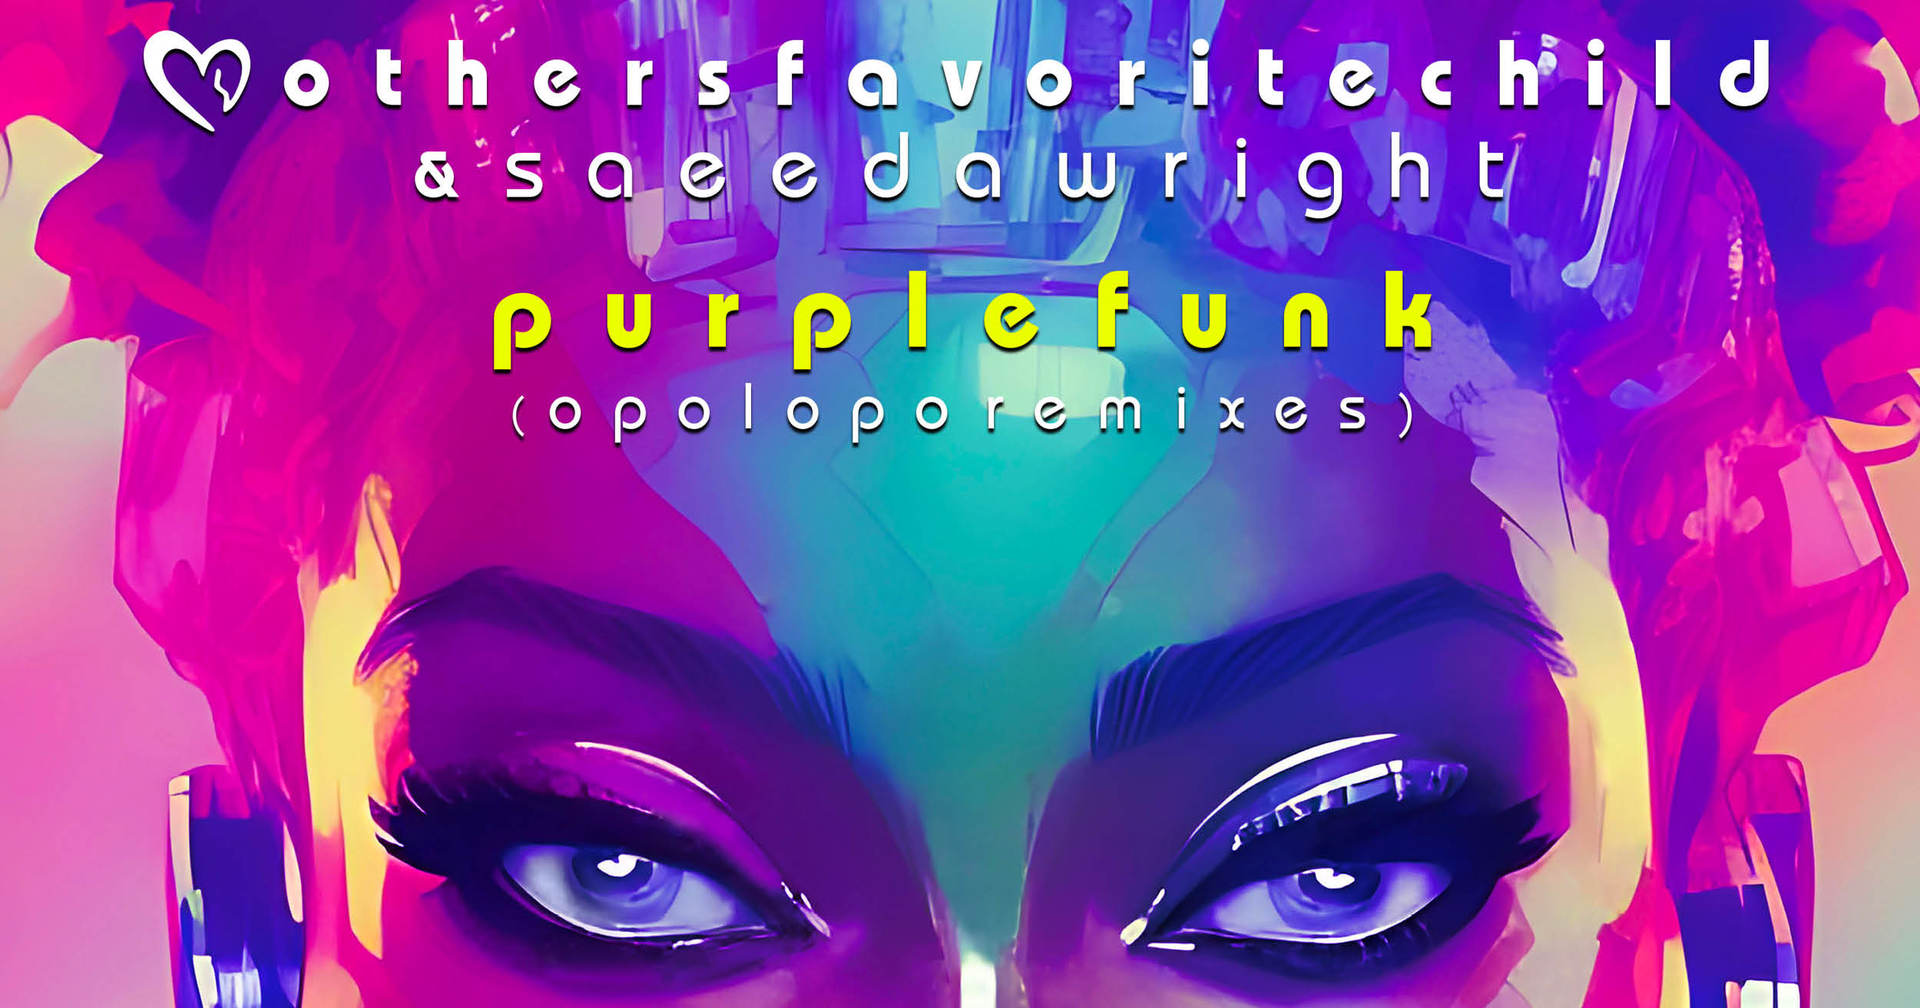 Mothers Favorite Child & Saeeda Wright release 'Purple Funk (Opolopo Remixes)'  as a tribute to Prince - CEC